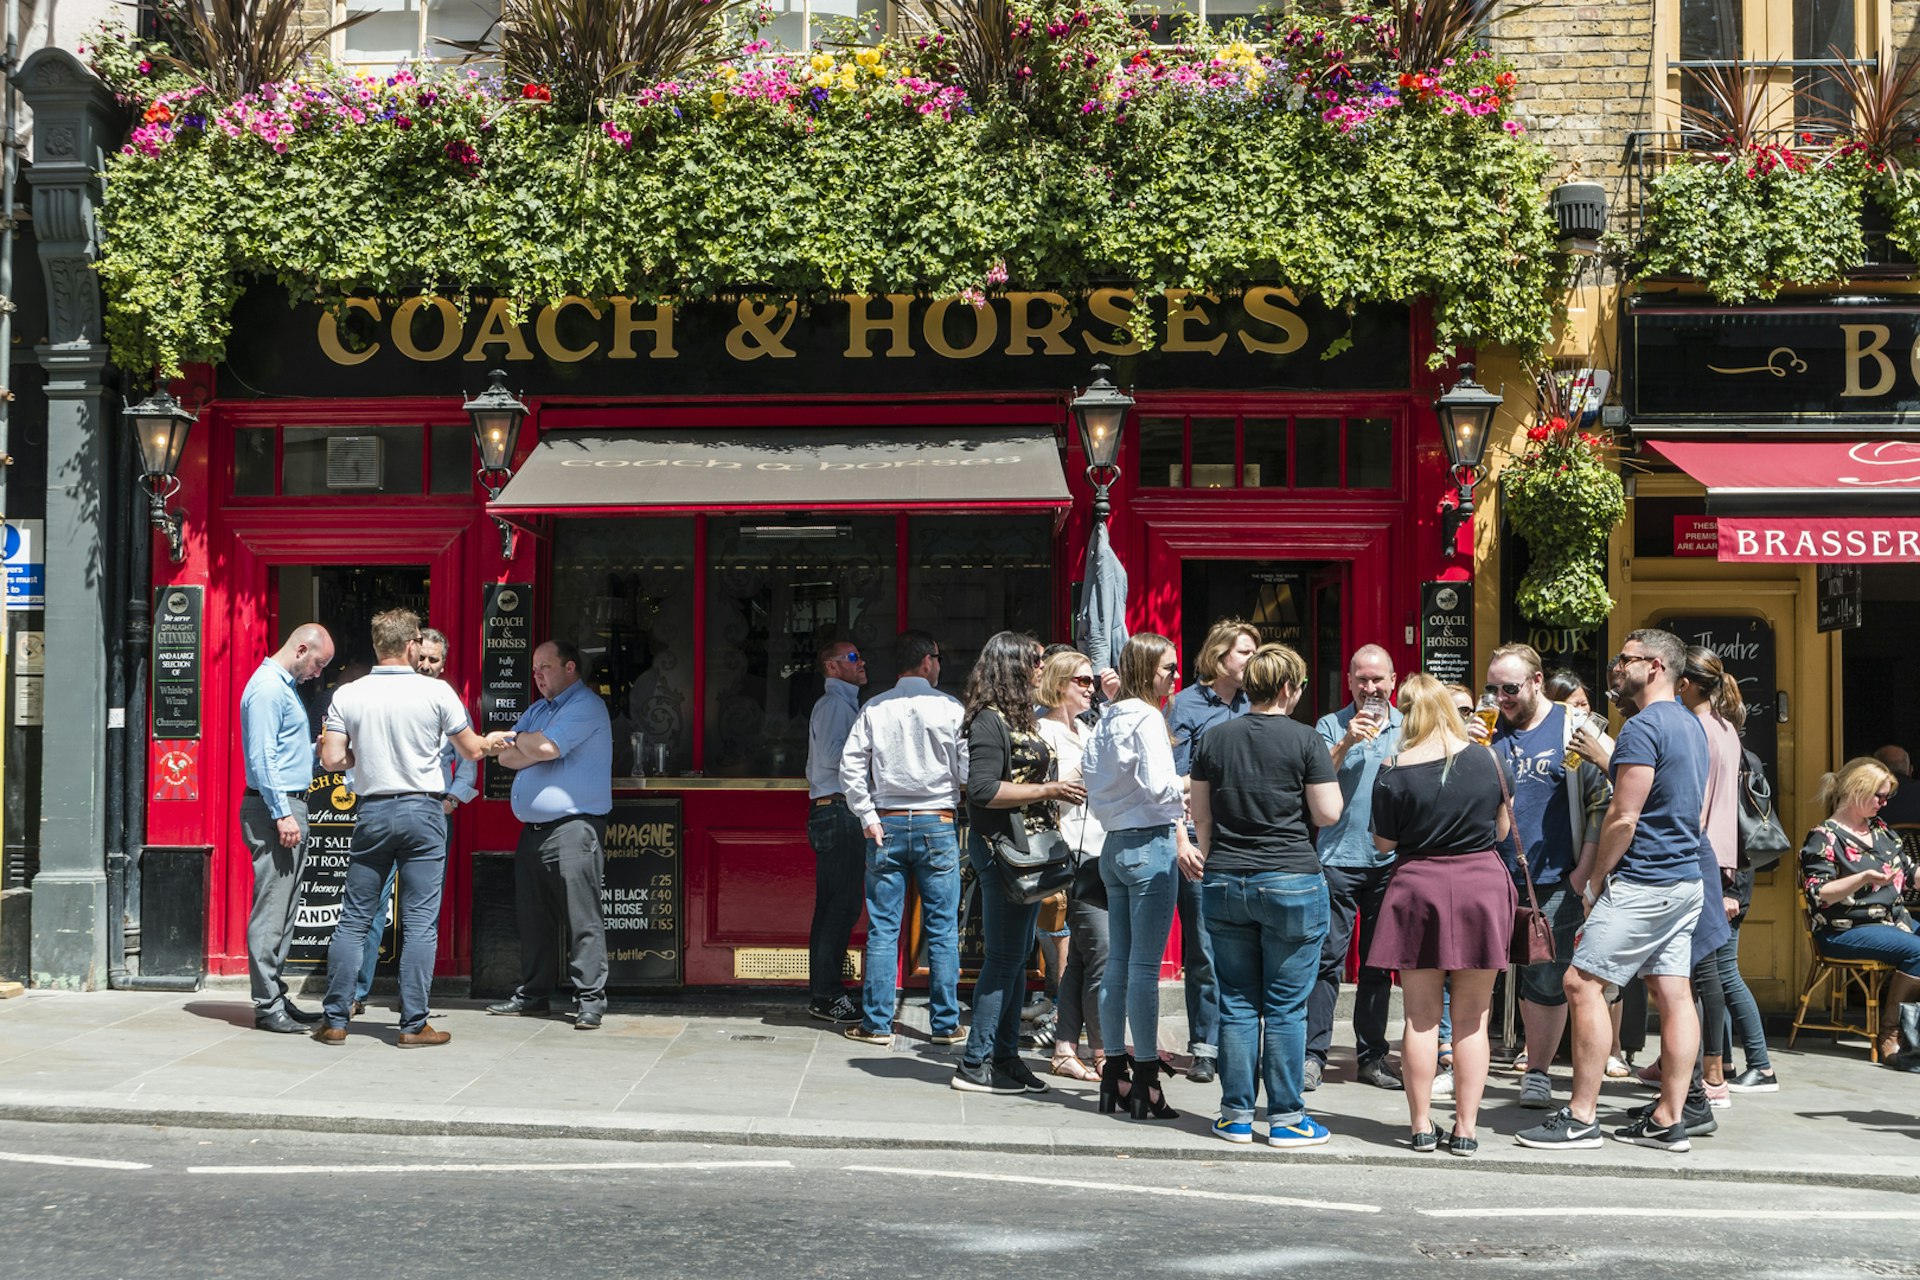 People gather in groups on the sidewalk outside a pub in London enjoying their drinks in the sunshine